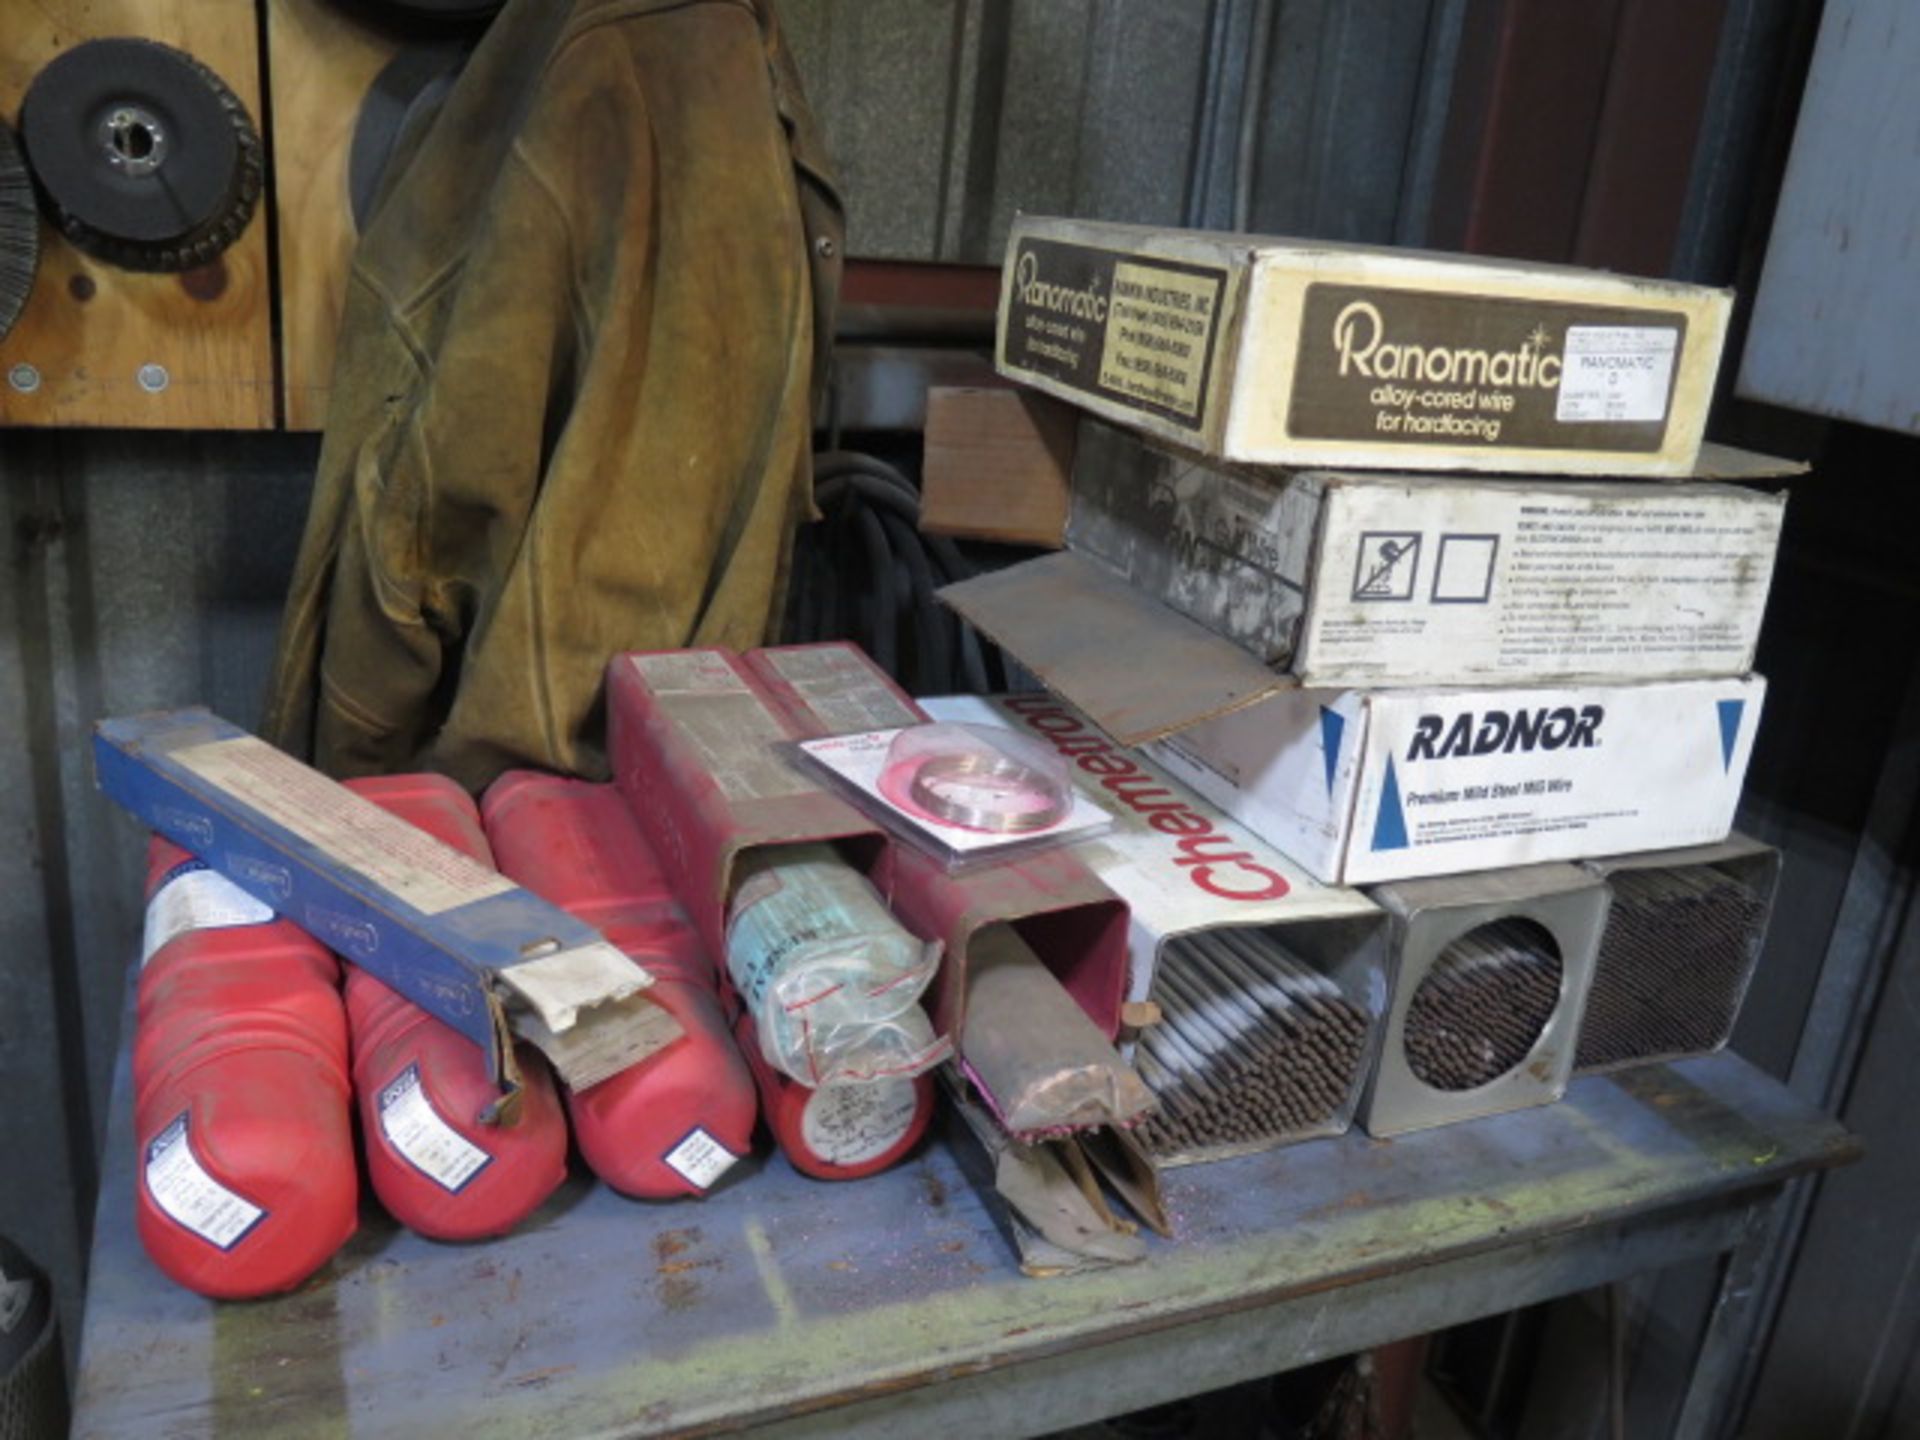 Welding Wire, Rods, leathers, Grinding Disca and Masks